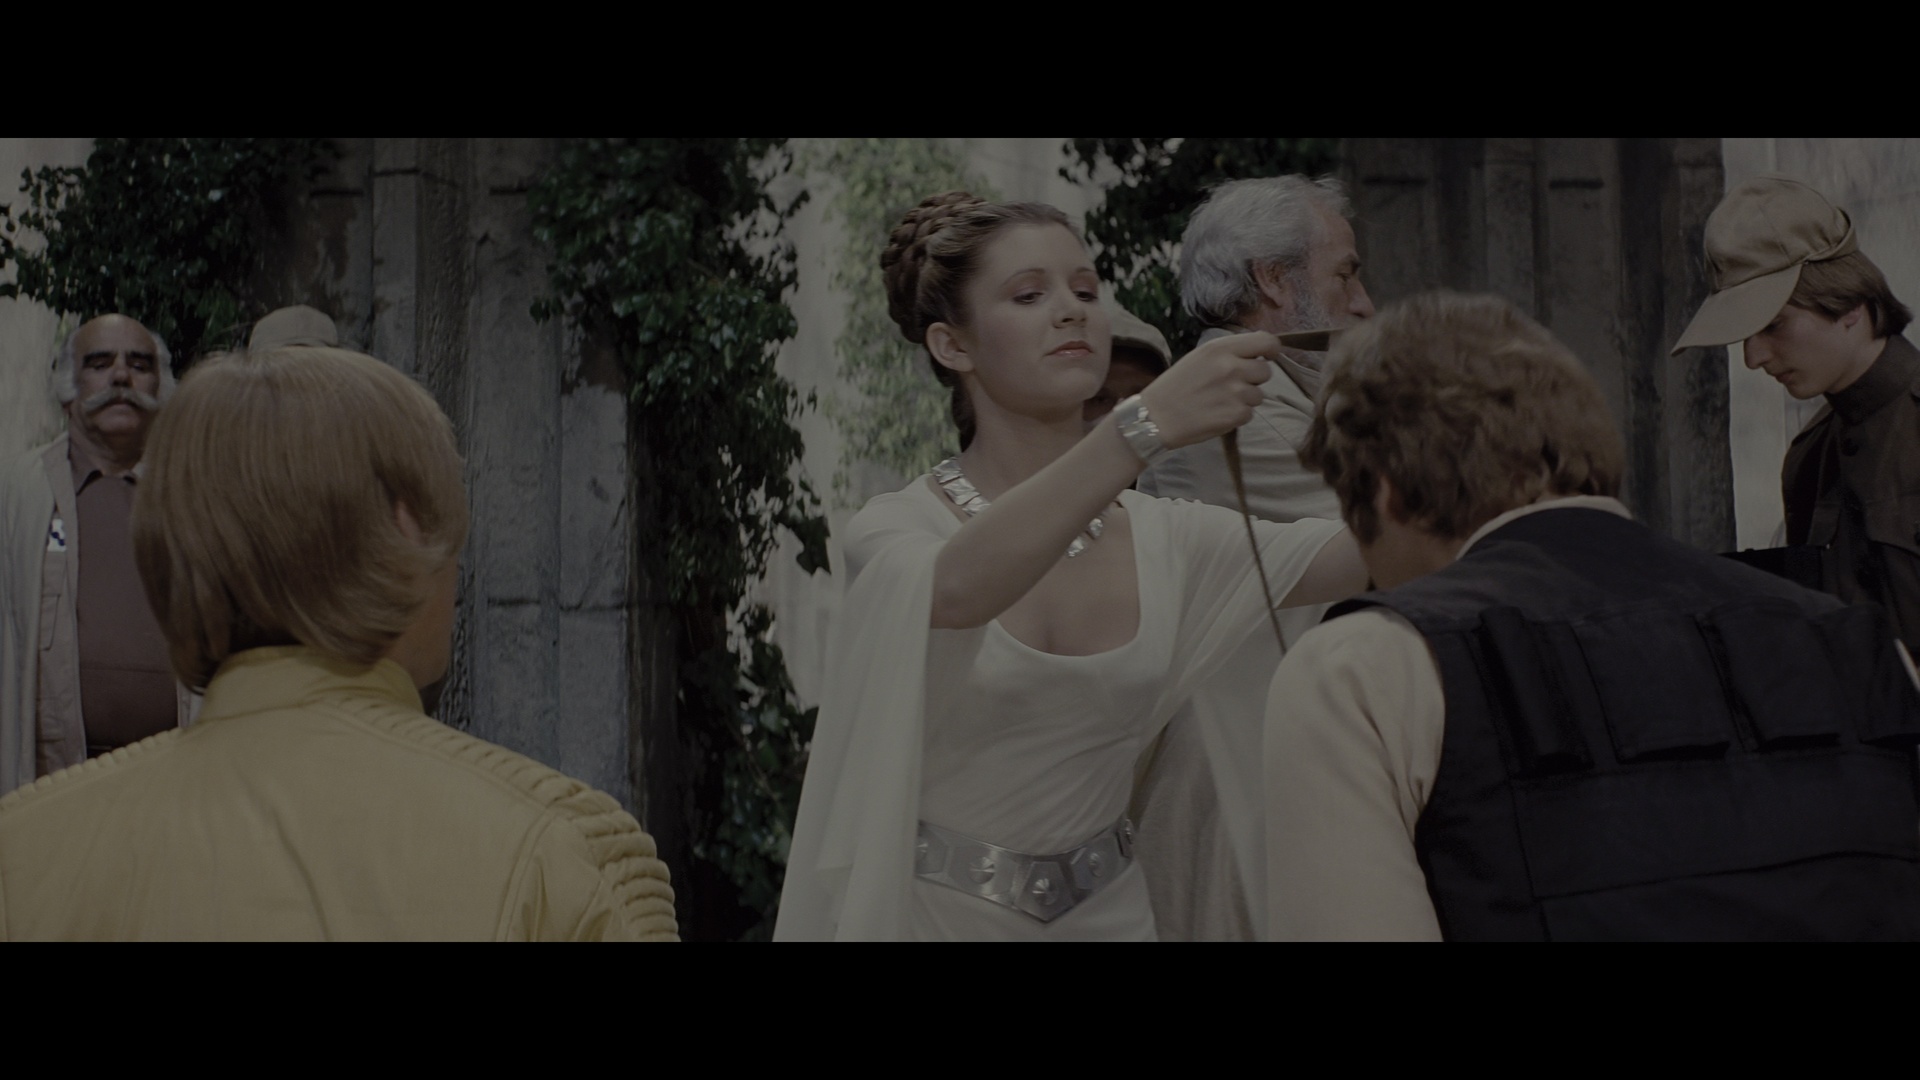 STAR WARS: A NEW HOPE (1977) - Princess Leia's (Carrie Fisher) Screen-Matched Ceremonial Dress - Image 35 of 39